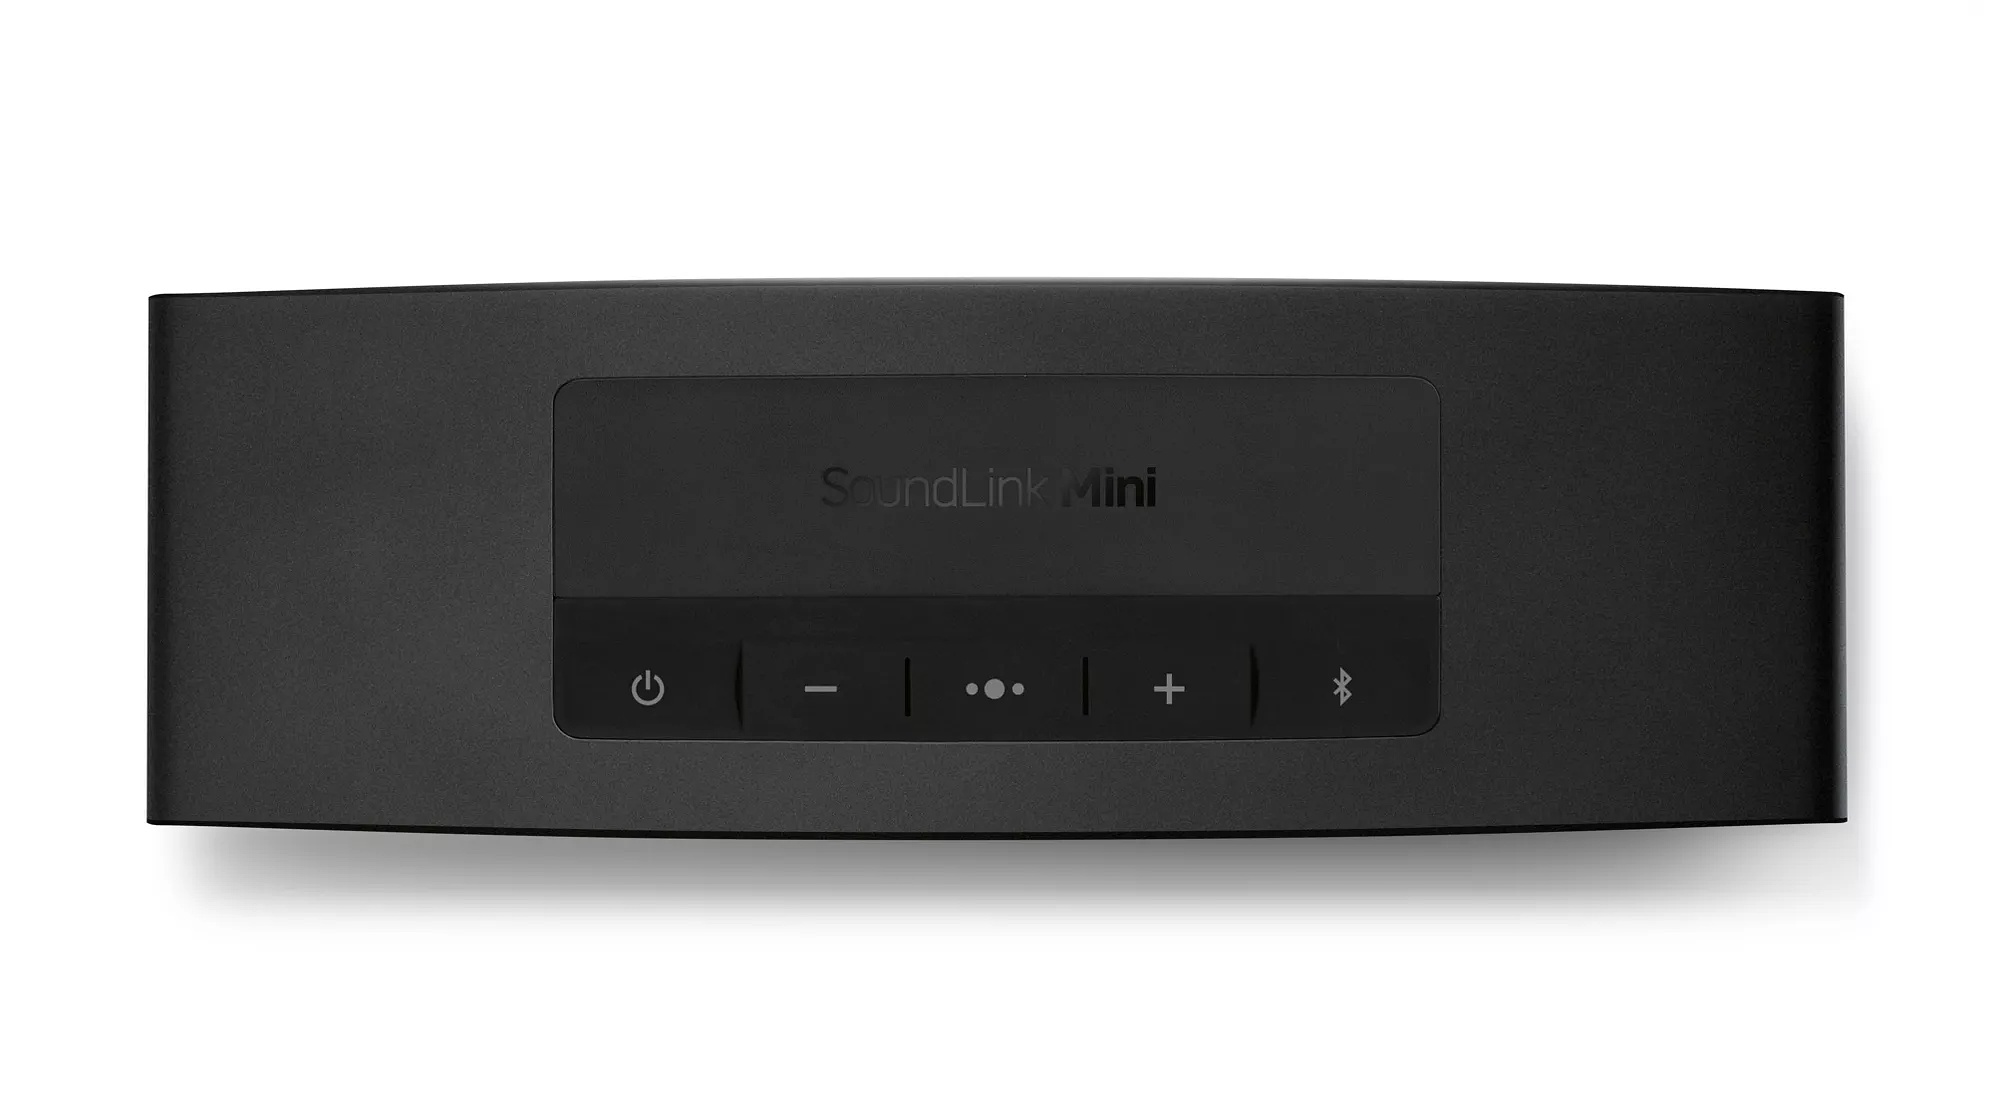 Top of SoundLink Mini II showing power, volume, multi-function, and Bluetooth buttons